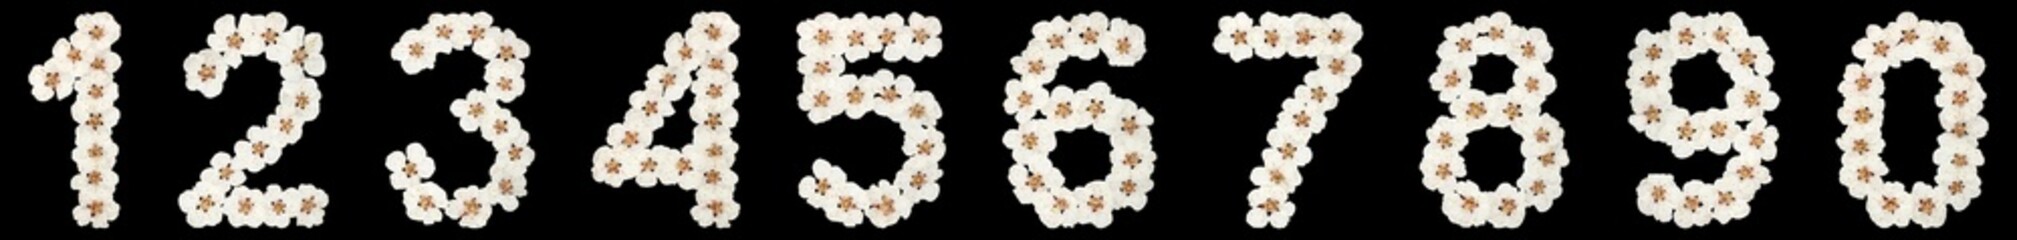 Set of arabic numbers, from natural white flowers of apricot tree, isolated on black background